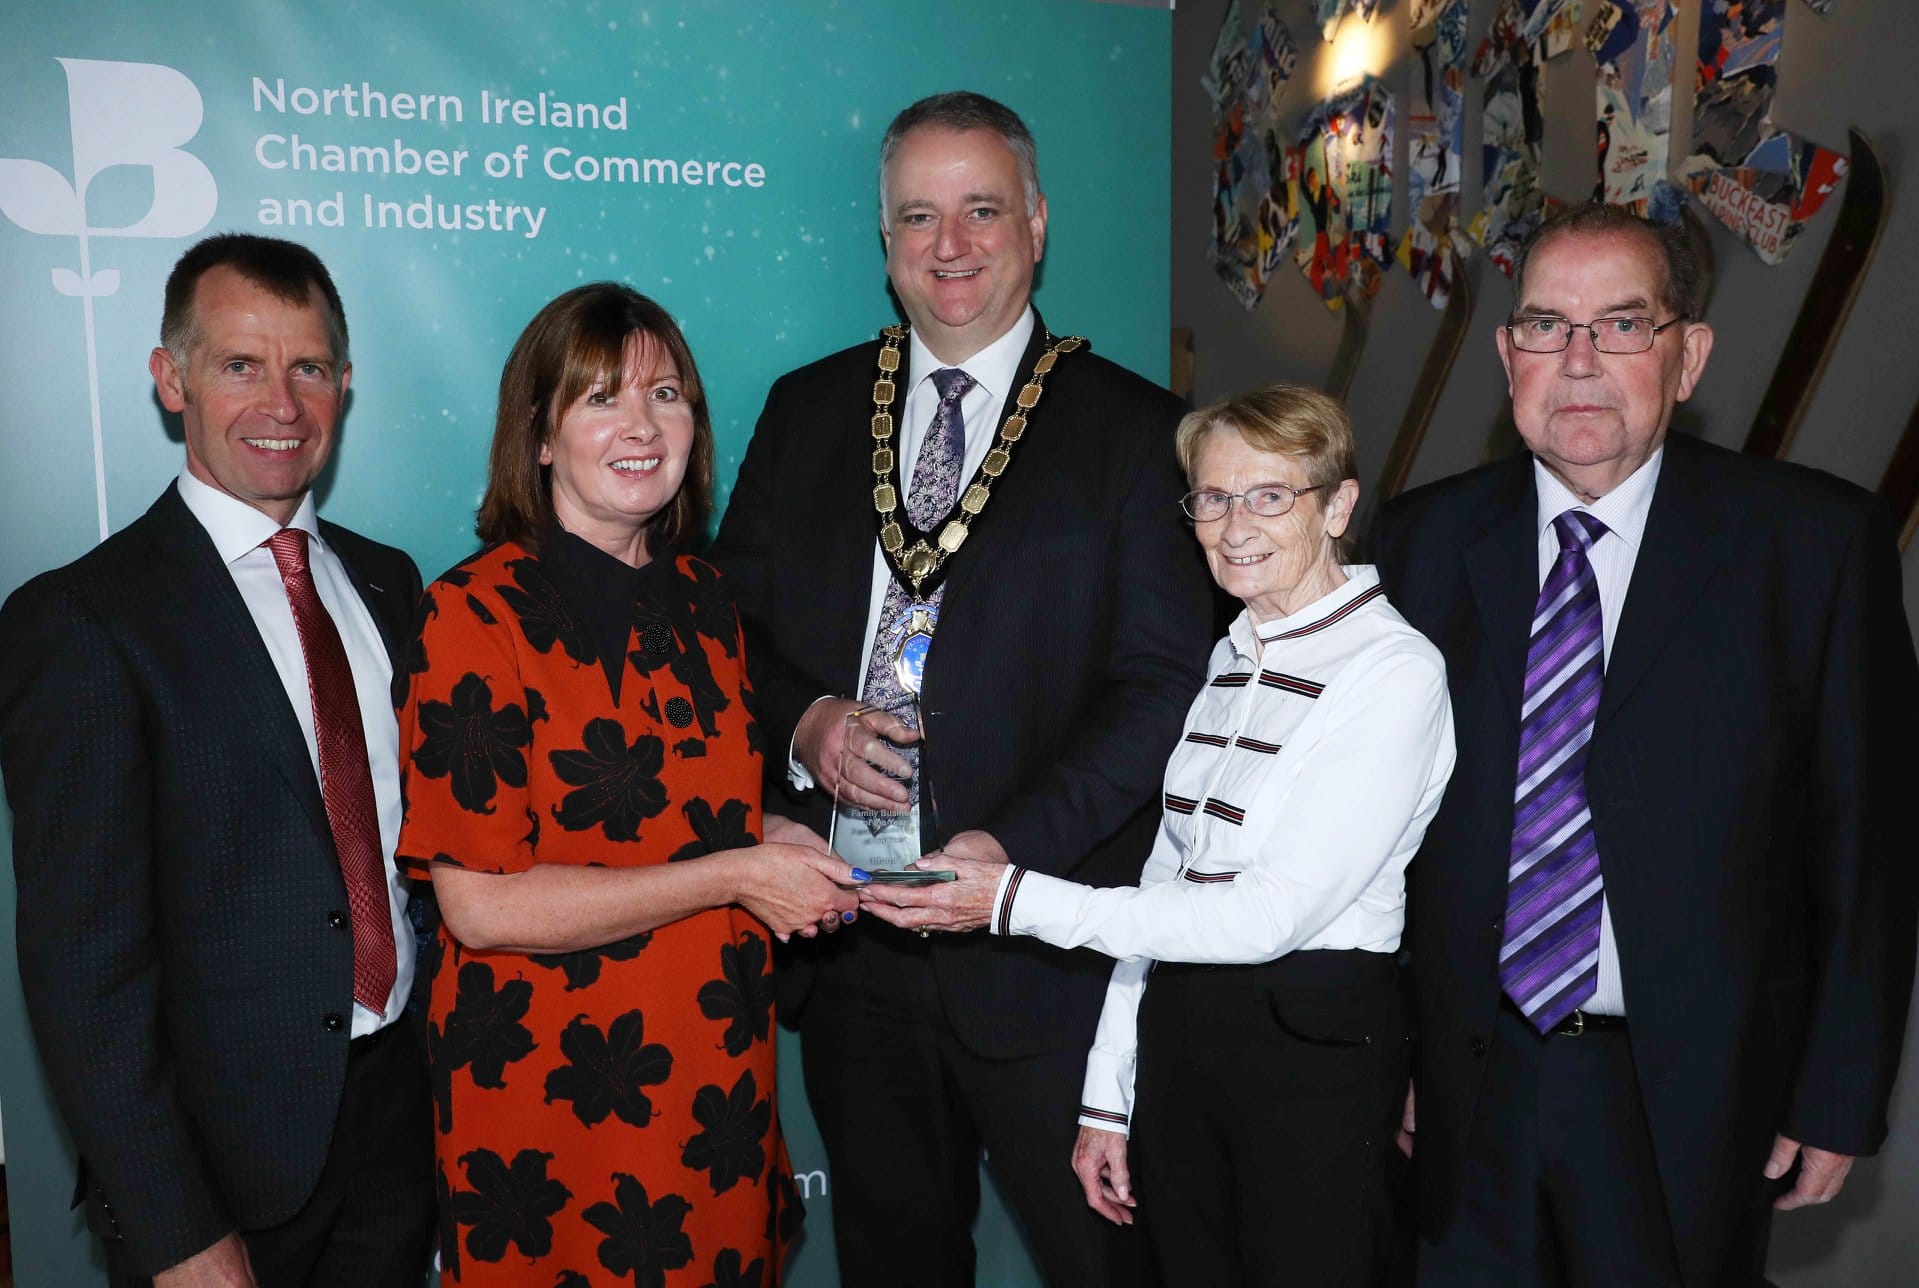 Northern Ireland Chamber of Commerce 2019 Award for Family Business of the Year